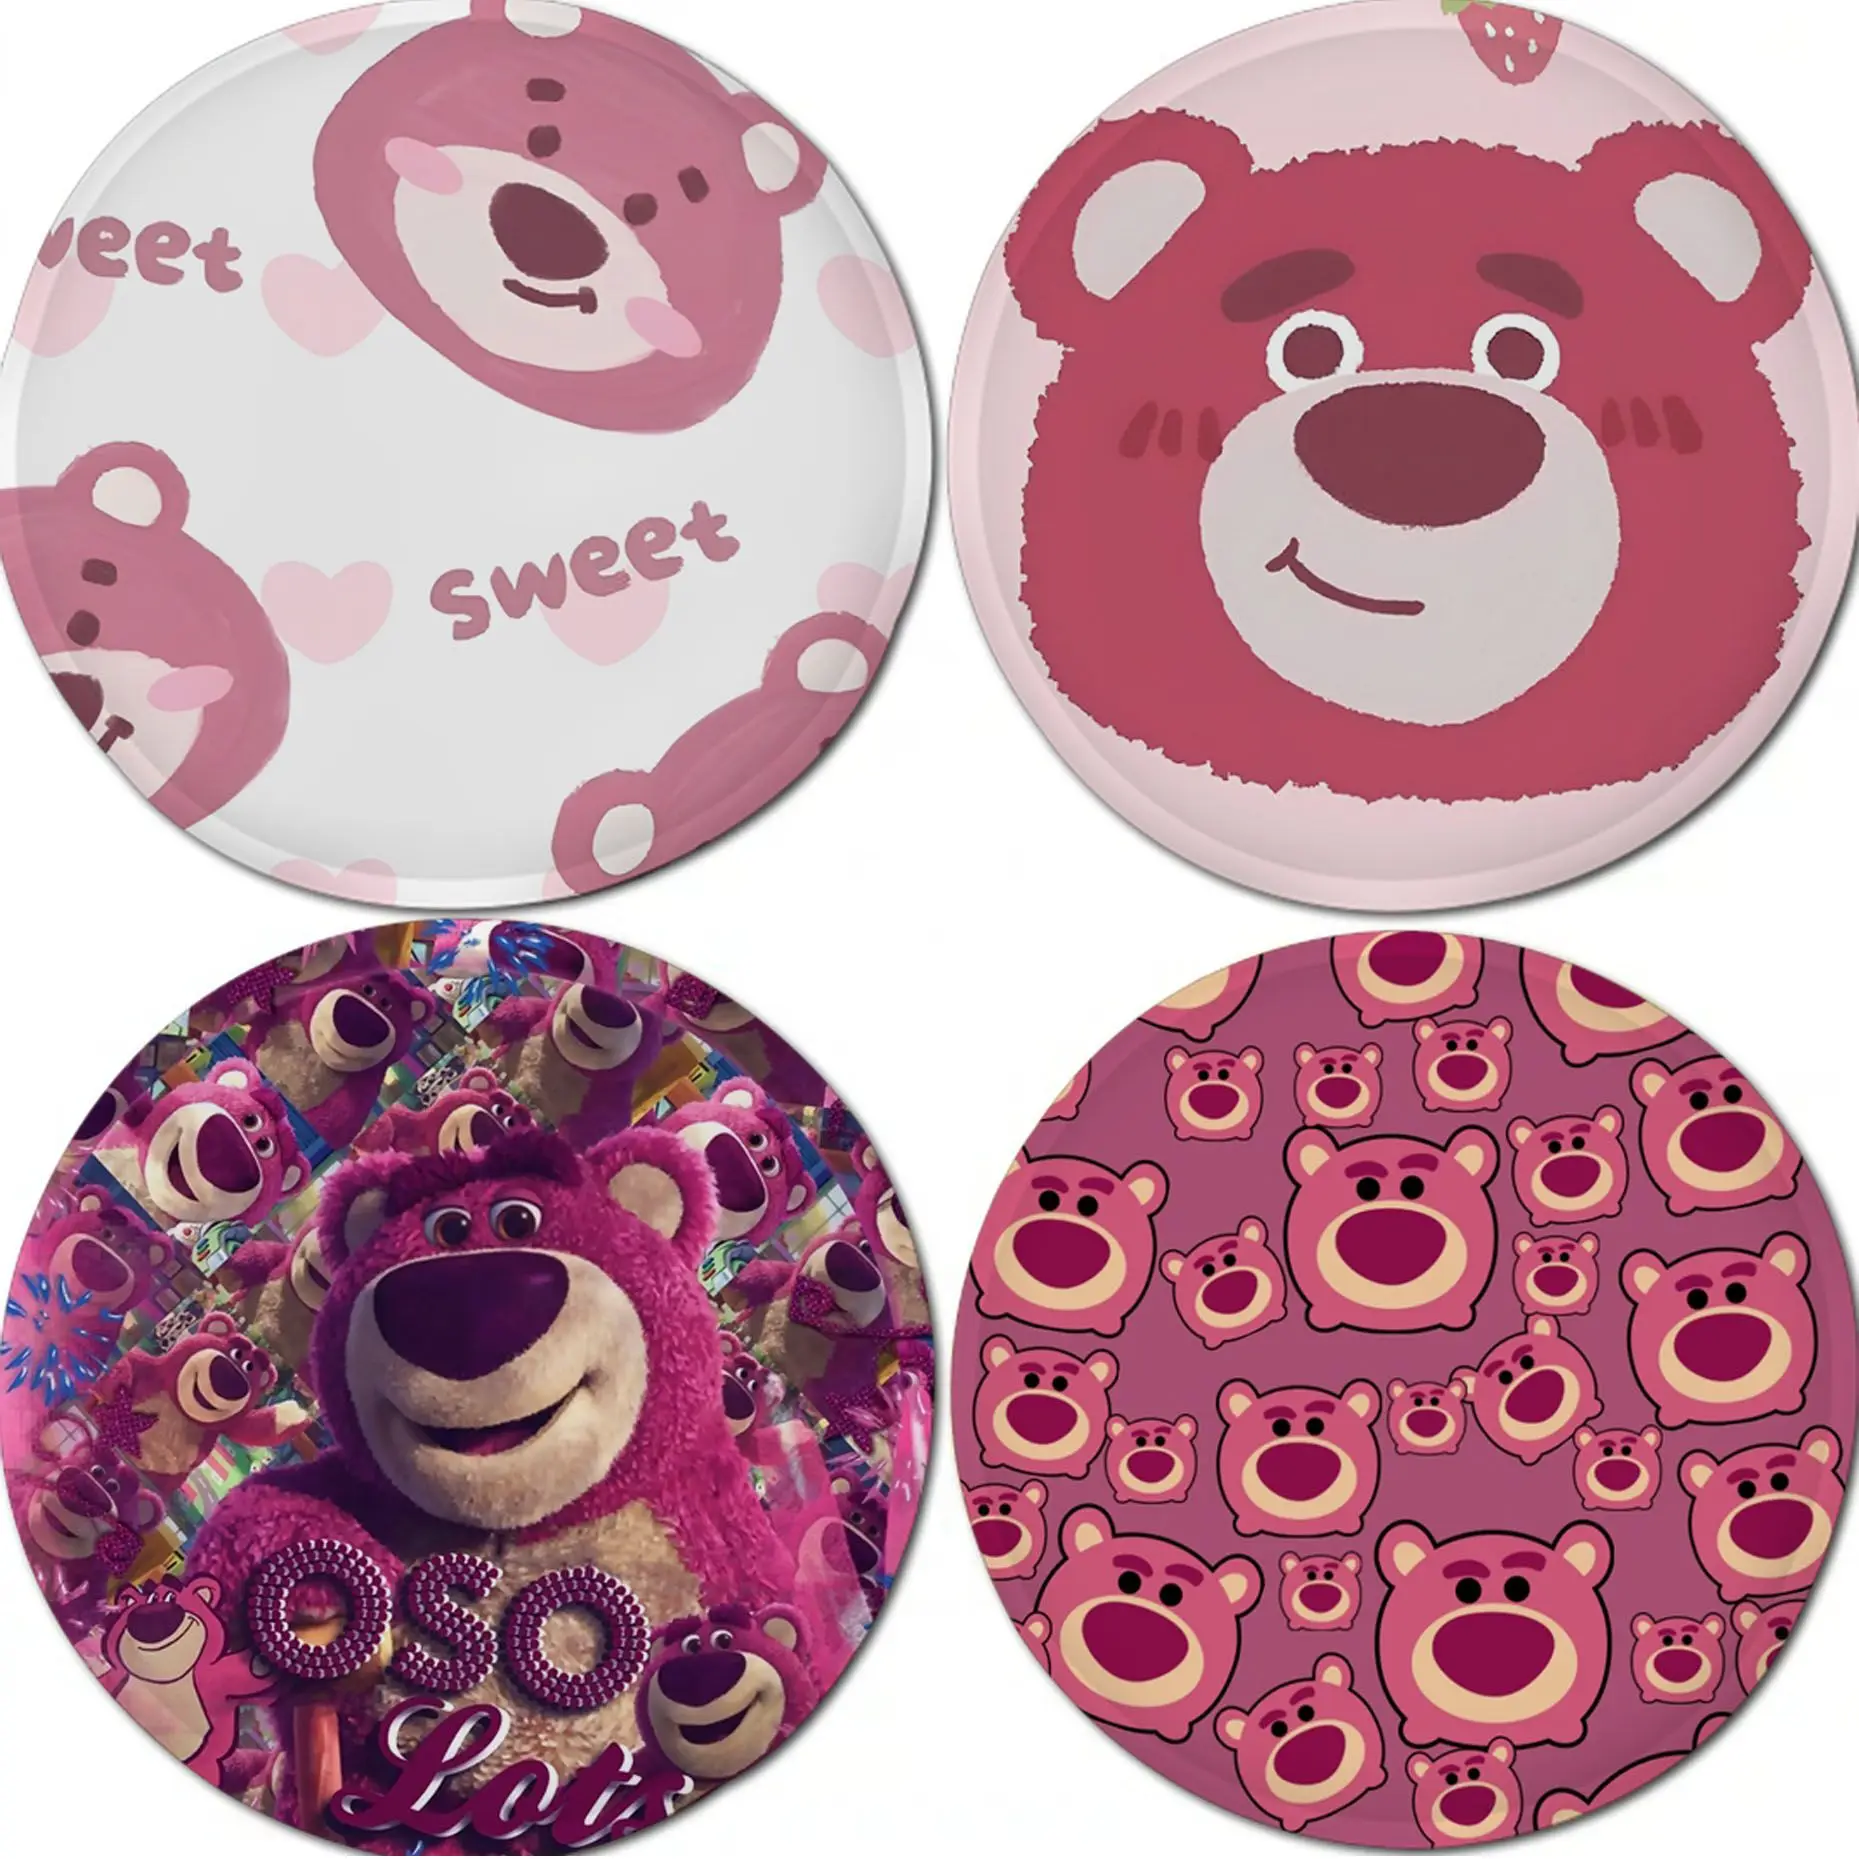 

Disney Lotso Simplicity Multi-Color Chair Cushion Soft Office Car Seat Comfort Breathable 45x45cm Outdoor Garden Cushions